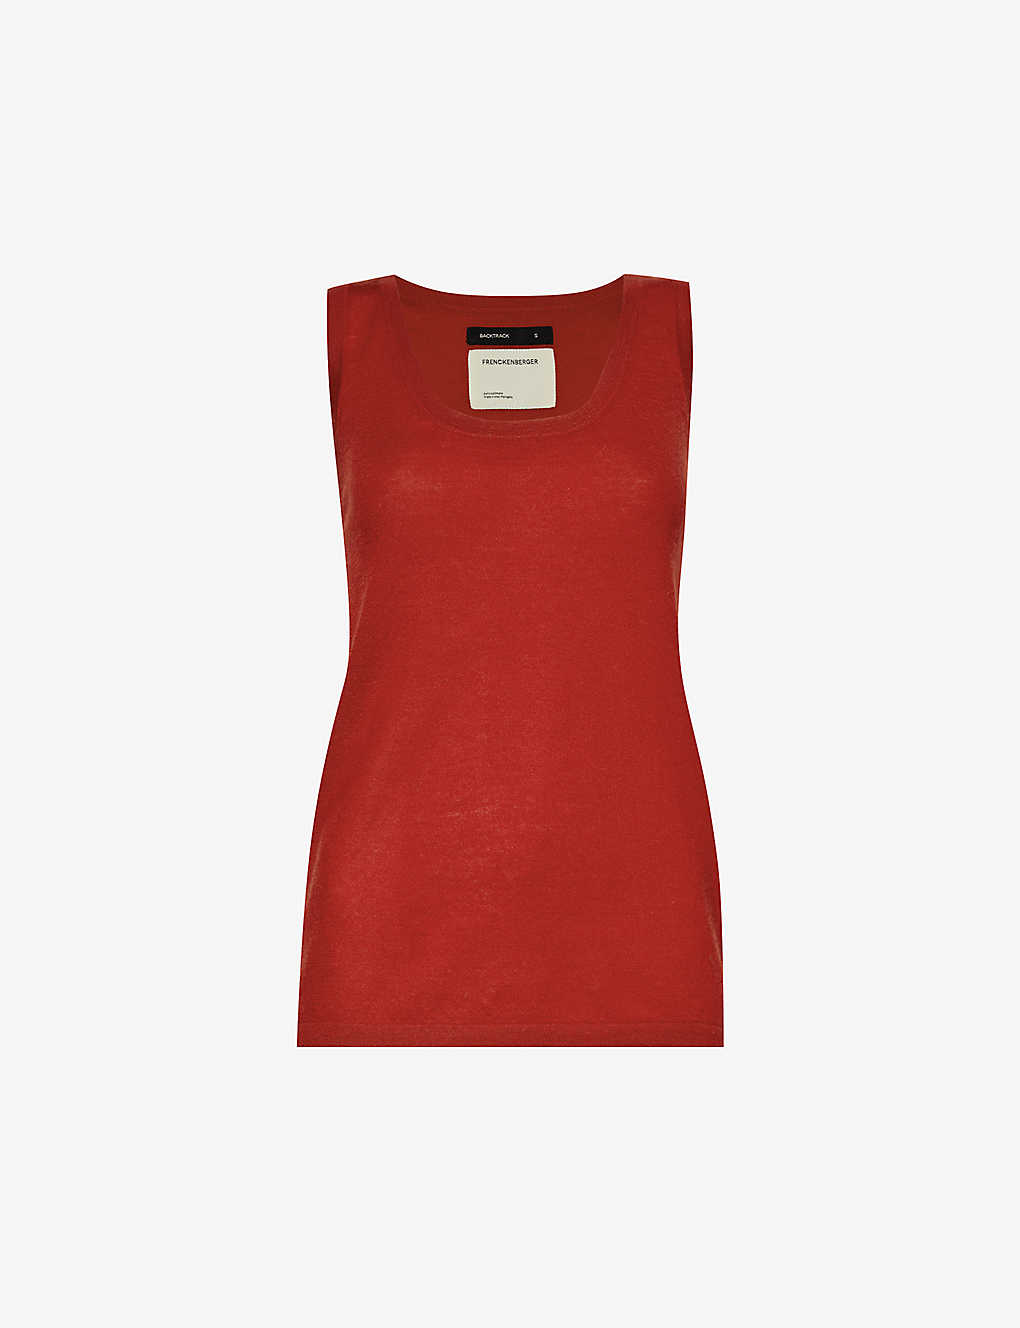 Shop Frenckenberger Womens Red Relaxed-fit Scoop-neck Cashmere Knitted Top